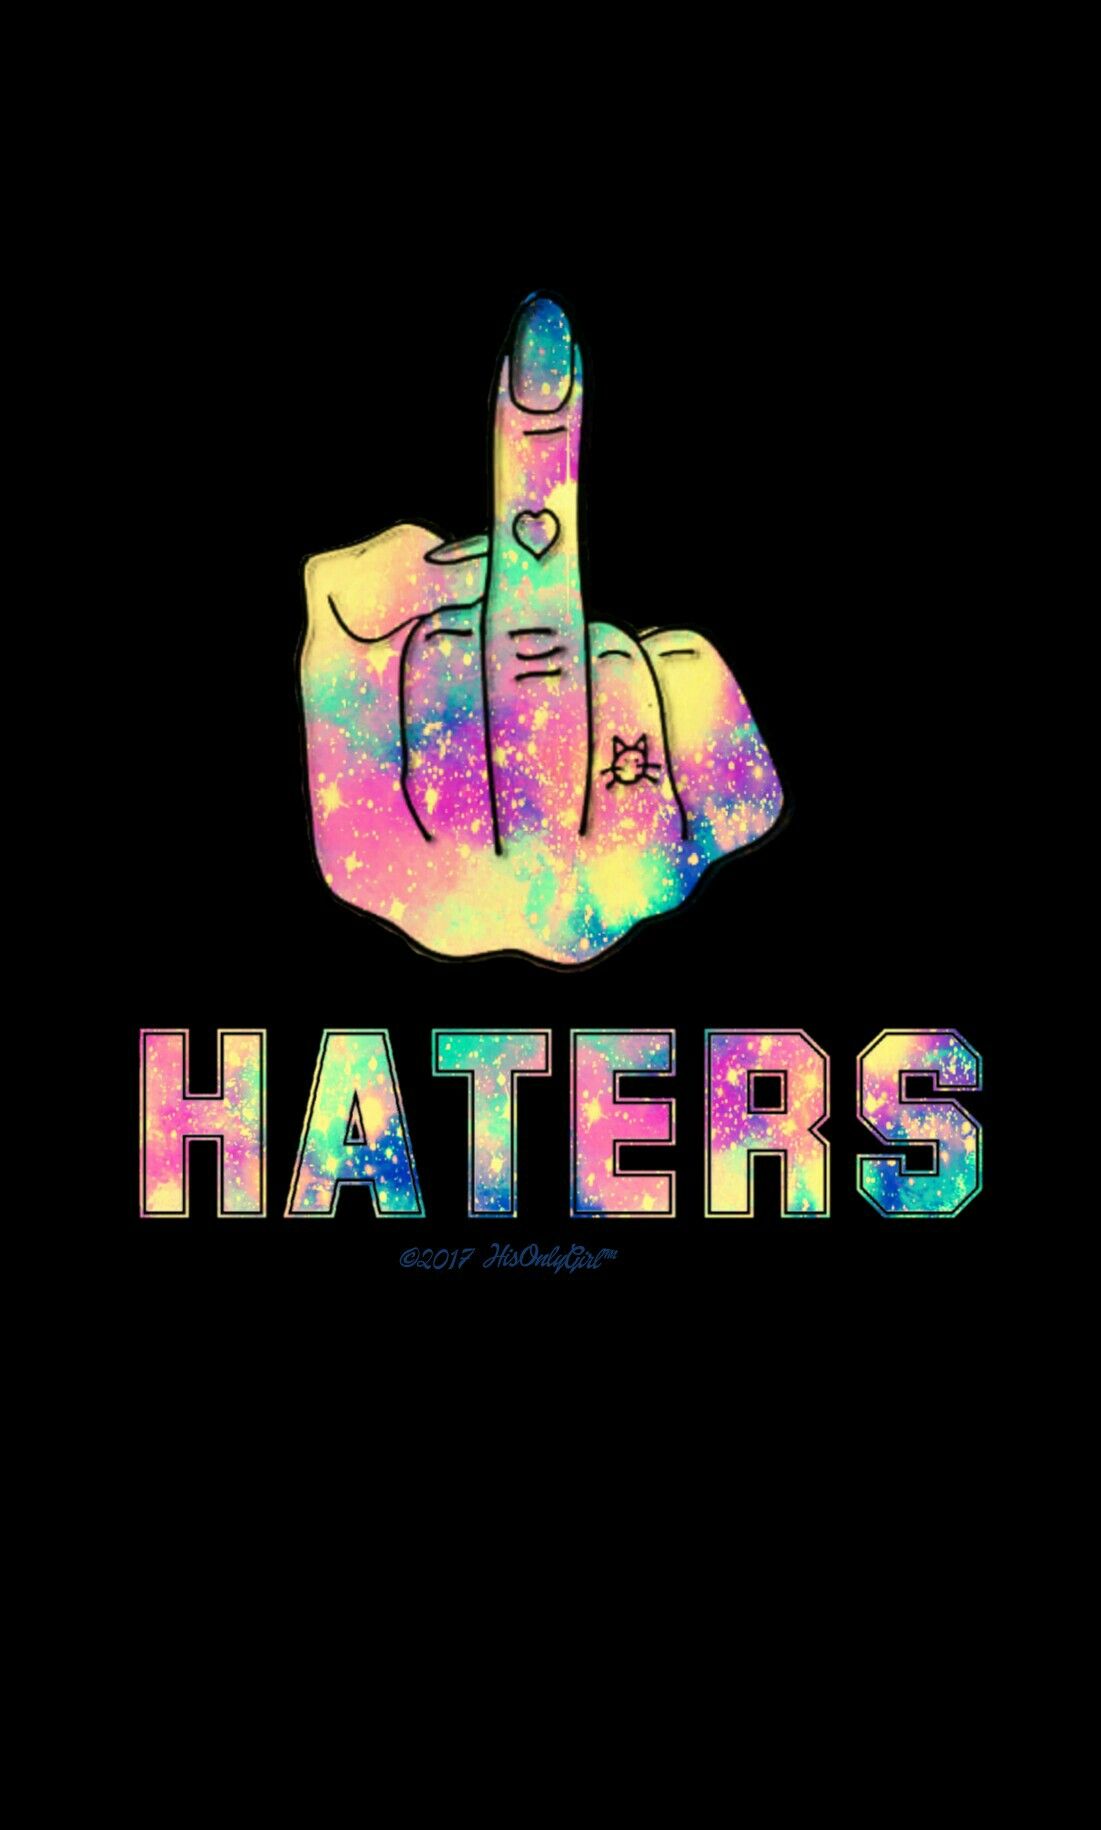 Eff U Haters Galaxy Wallpaper I Created For The App Cocoppa Pop